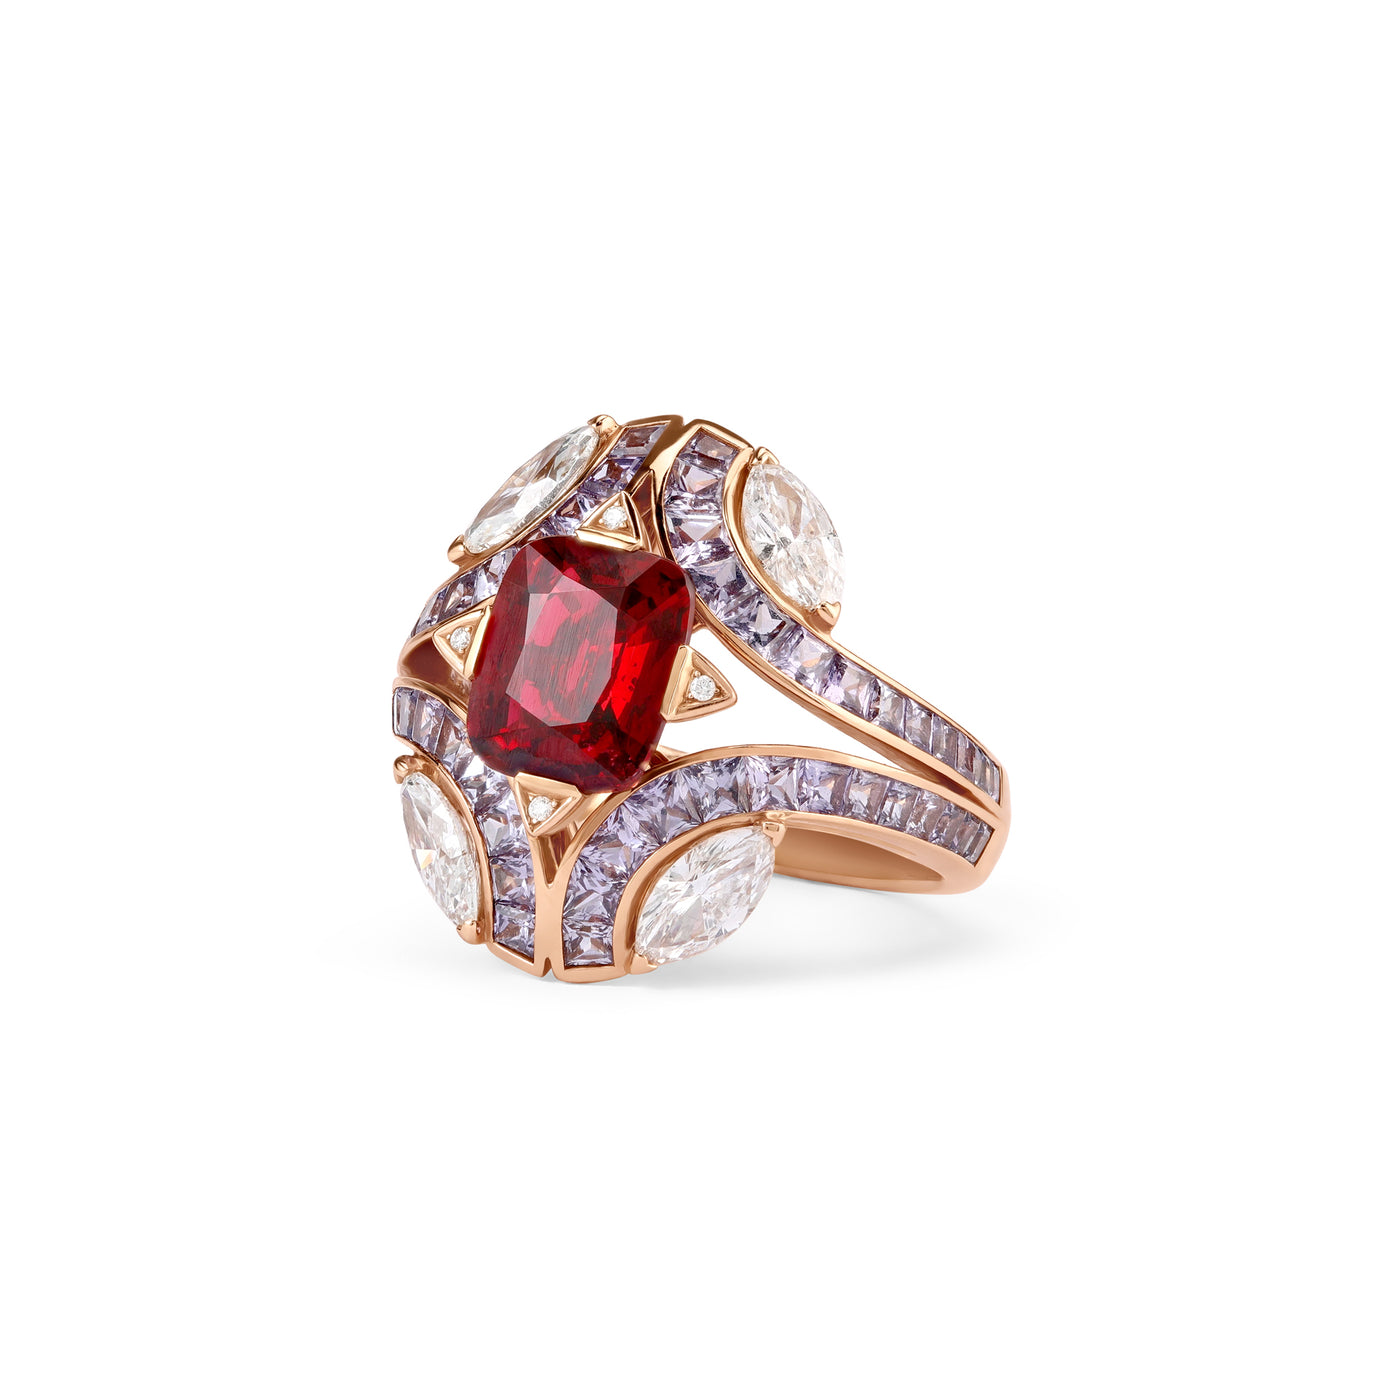 Rose gold diamond ring with vivid Natural spinel